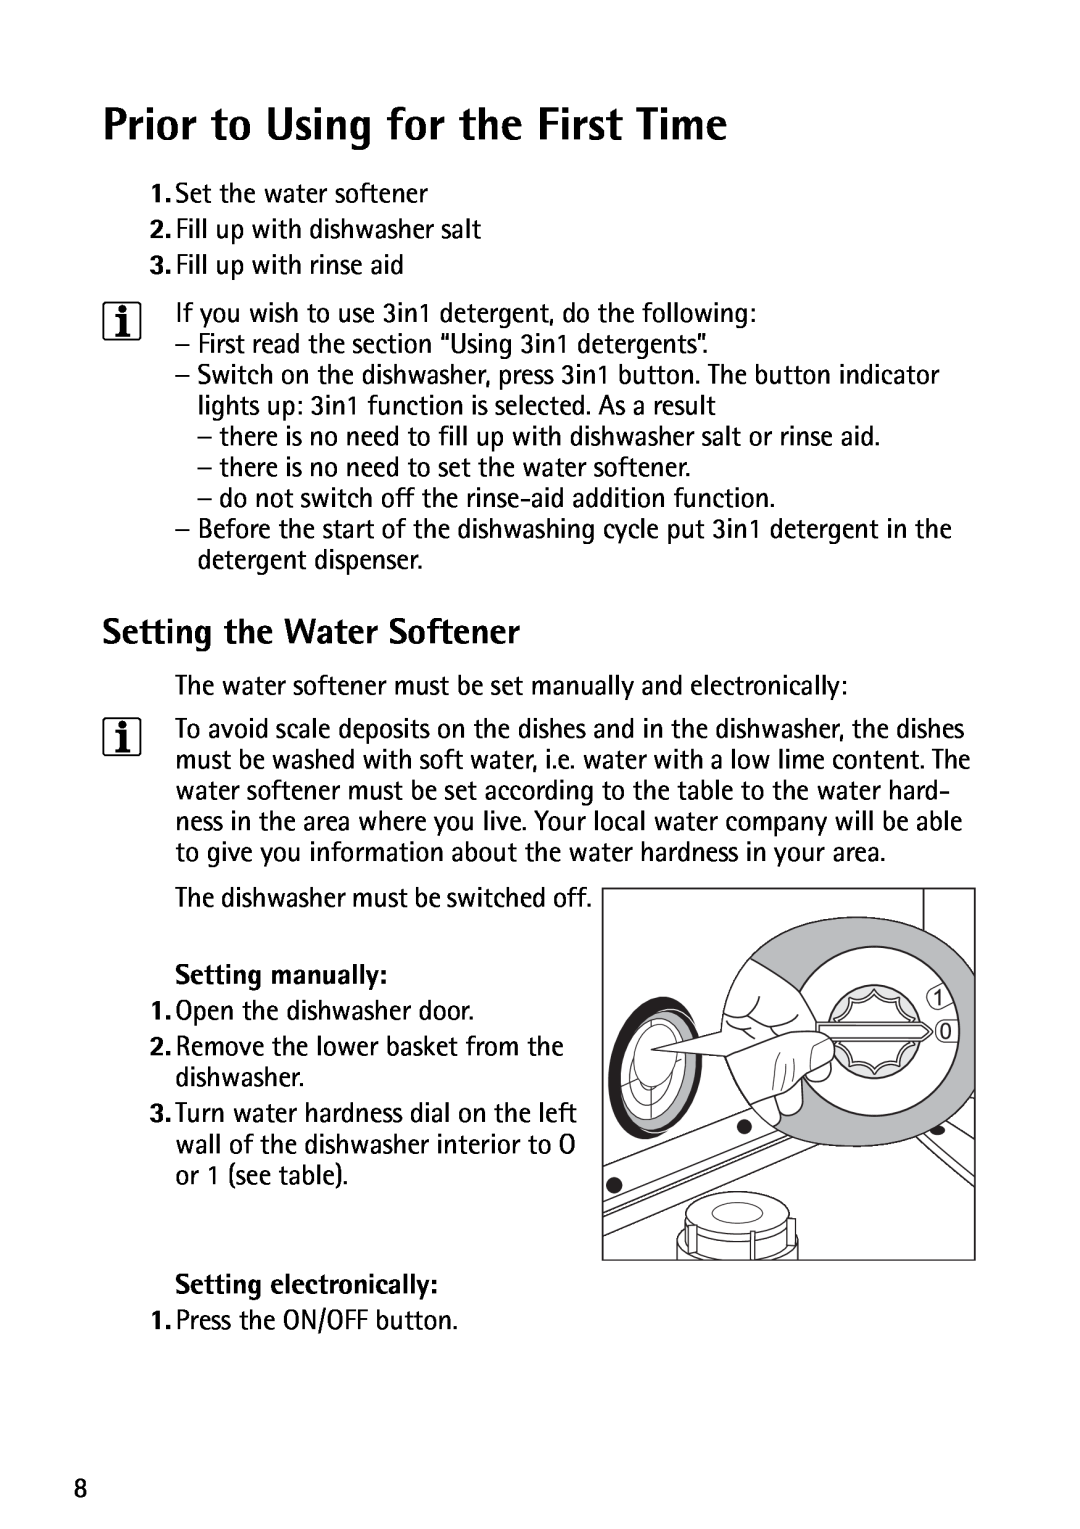 John Lewis JLDWS1202 instruction manual Prior to Using for the First Time, Setting the Water Softener, Setting manually 